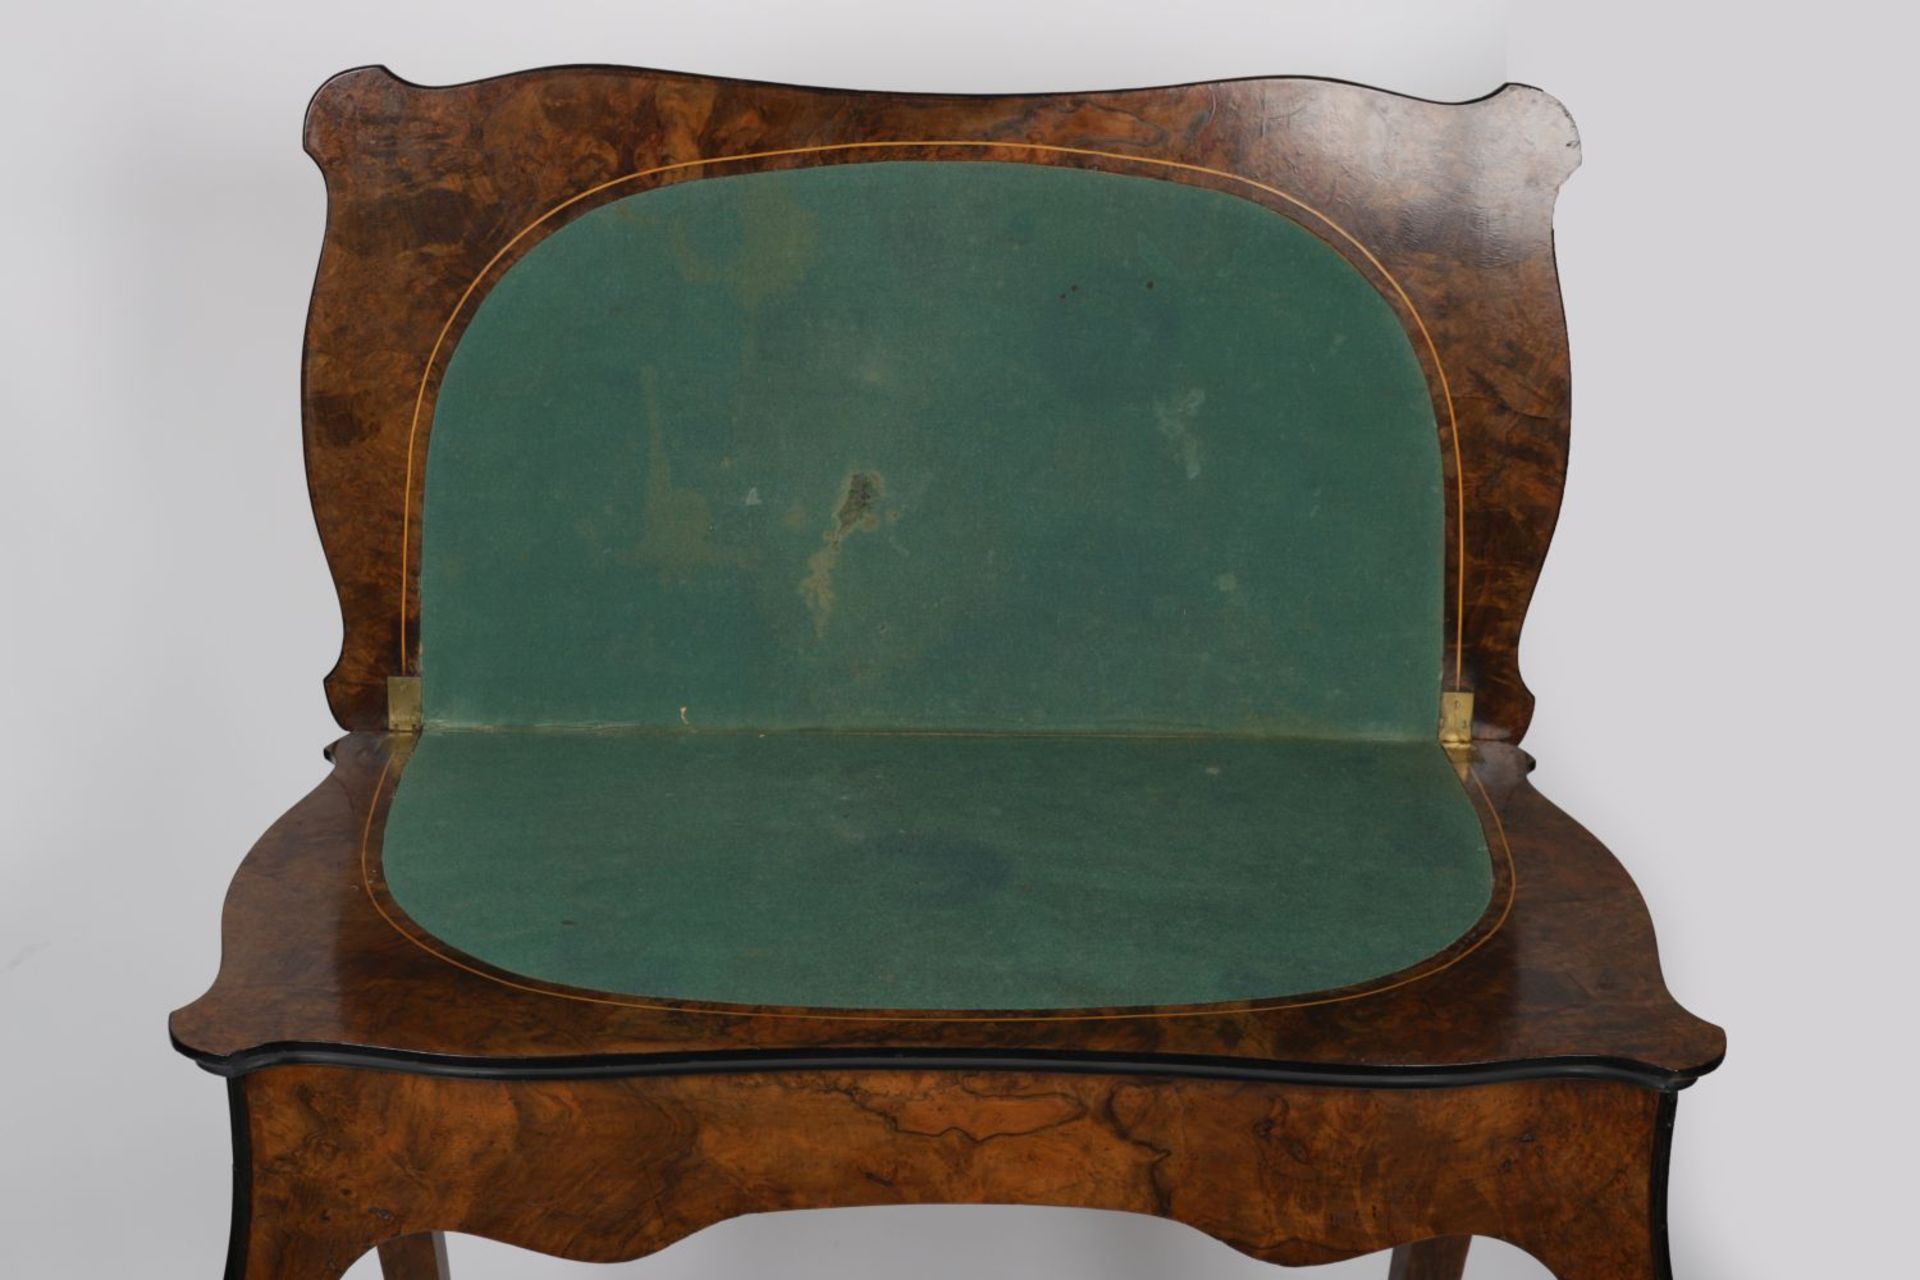 19TH-CENTURY BURR WALNUT GAMES TABLE - Image 2 of 3